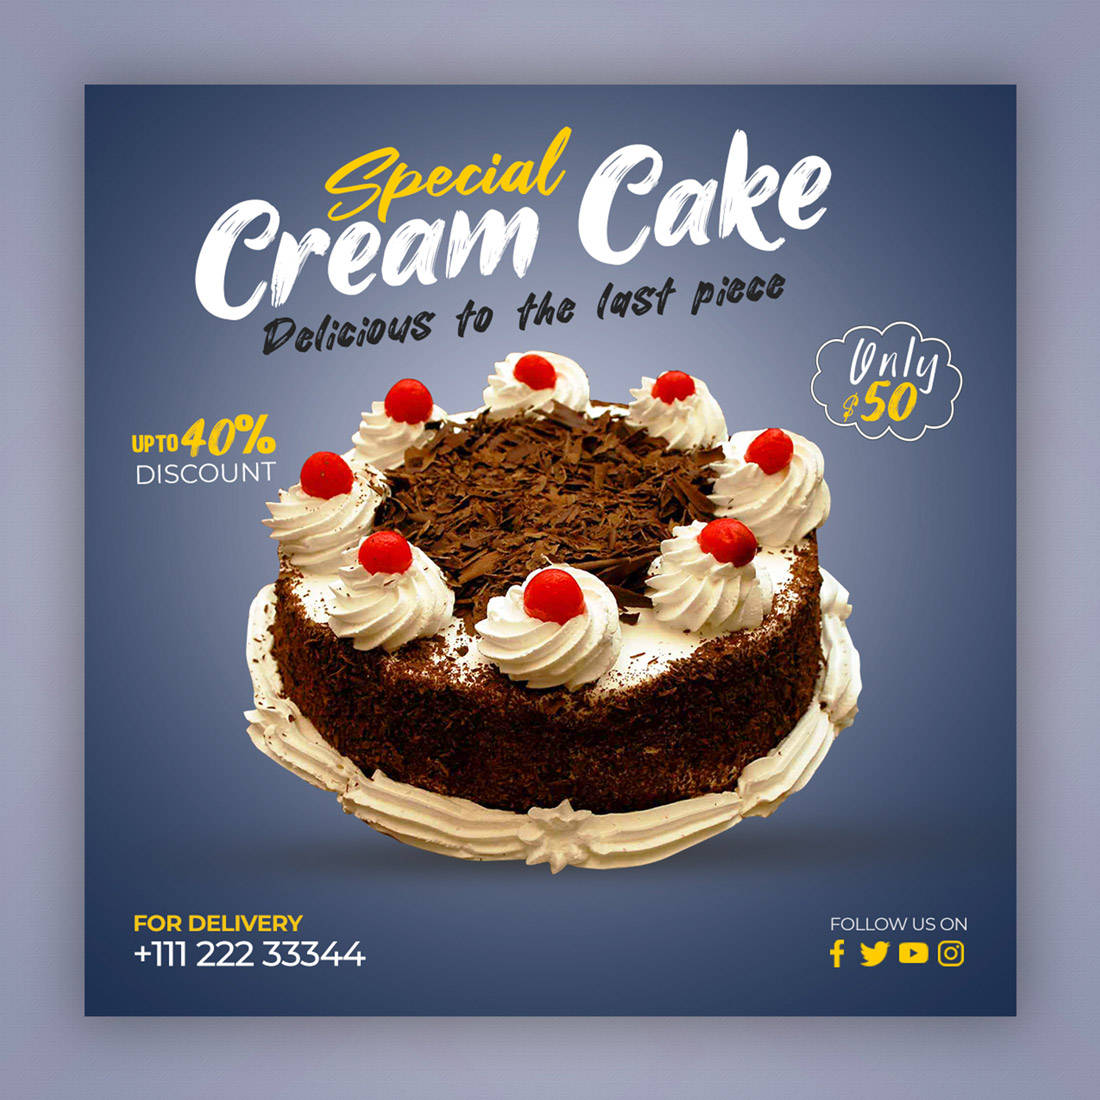 Poster advertising a cake with white frosting and cherries by Simon Gaon.